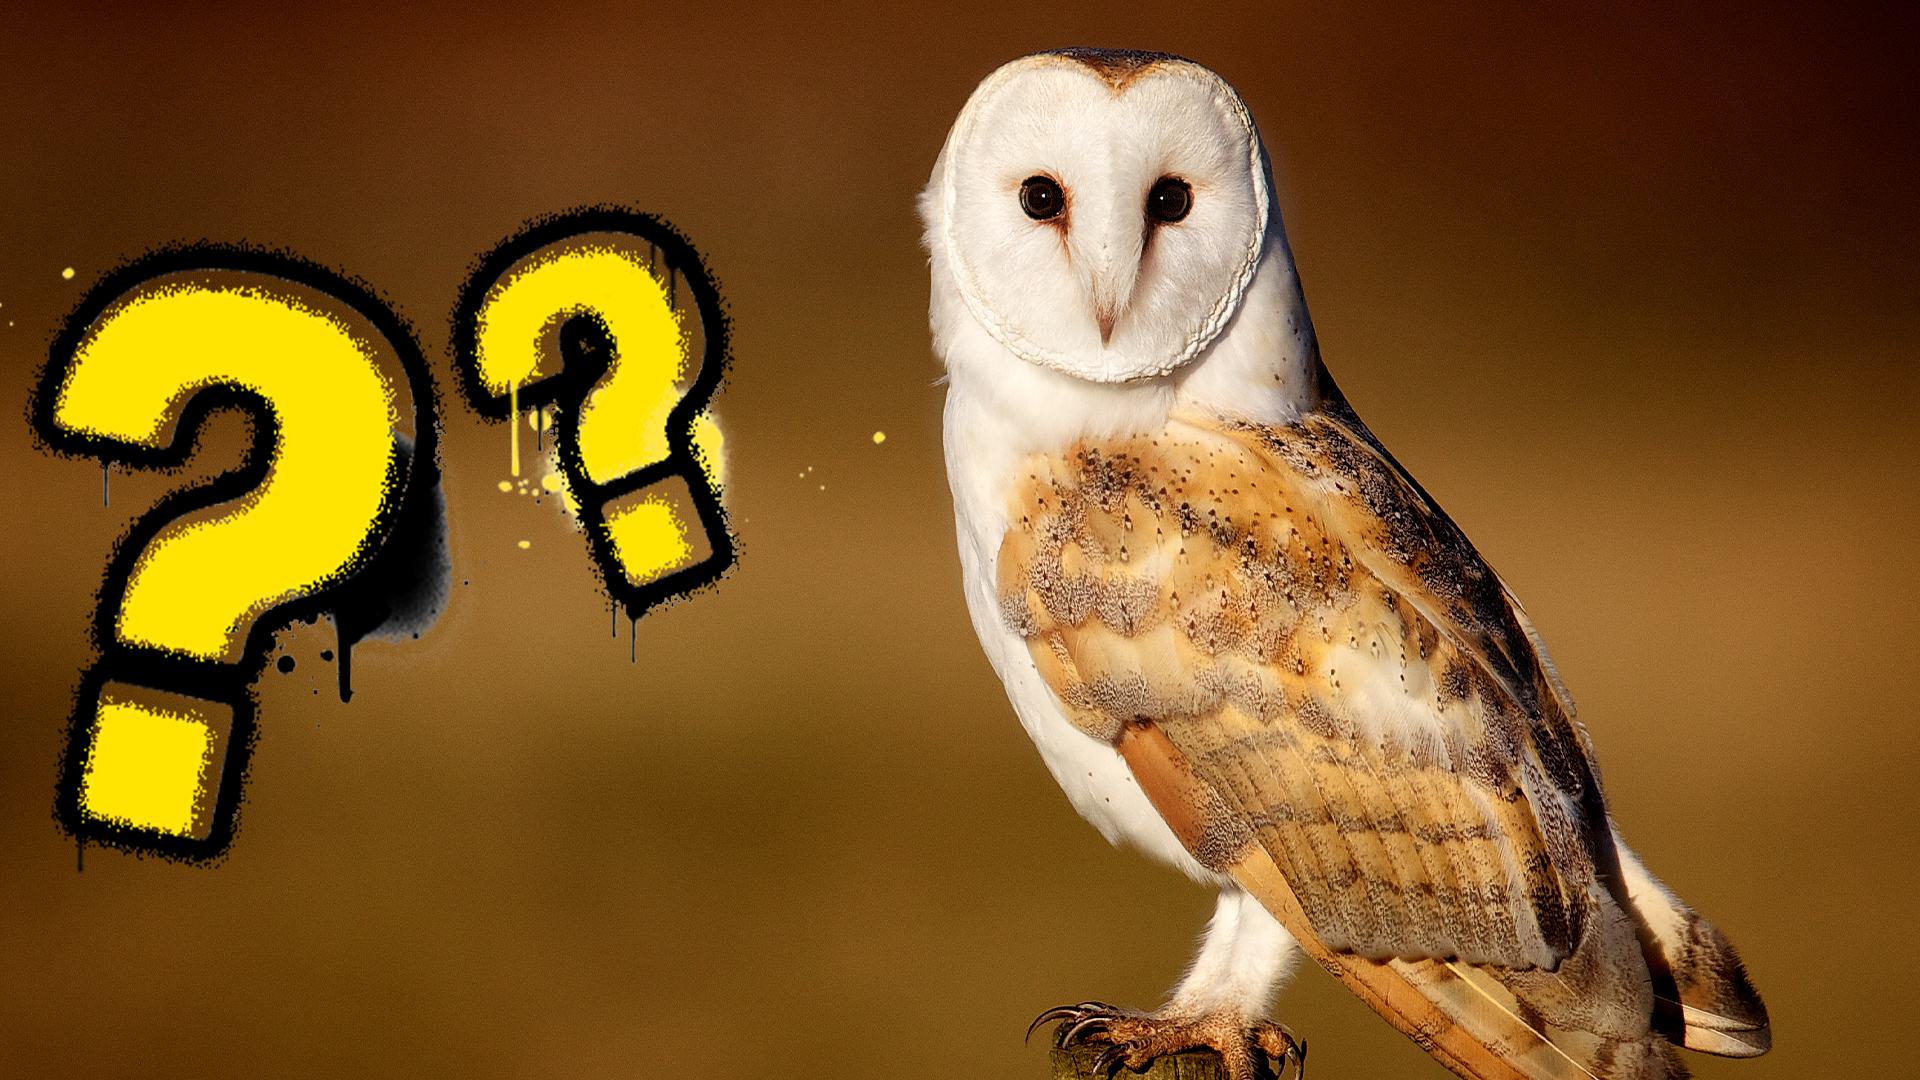 Owl and question mark